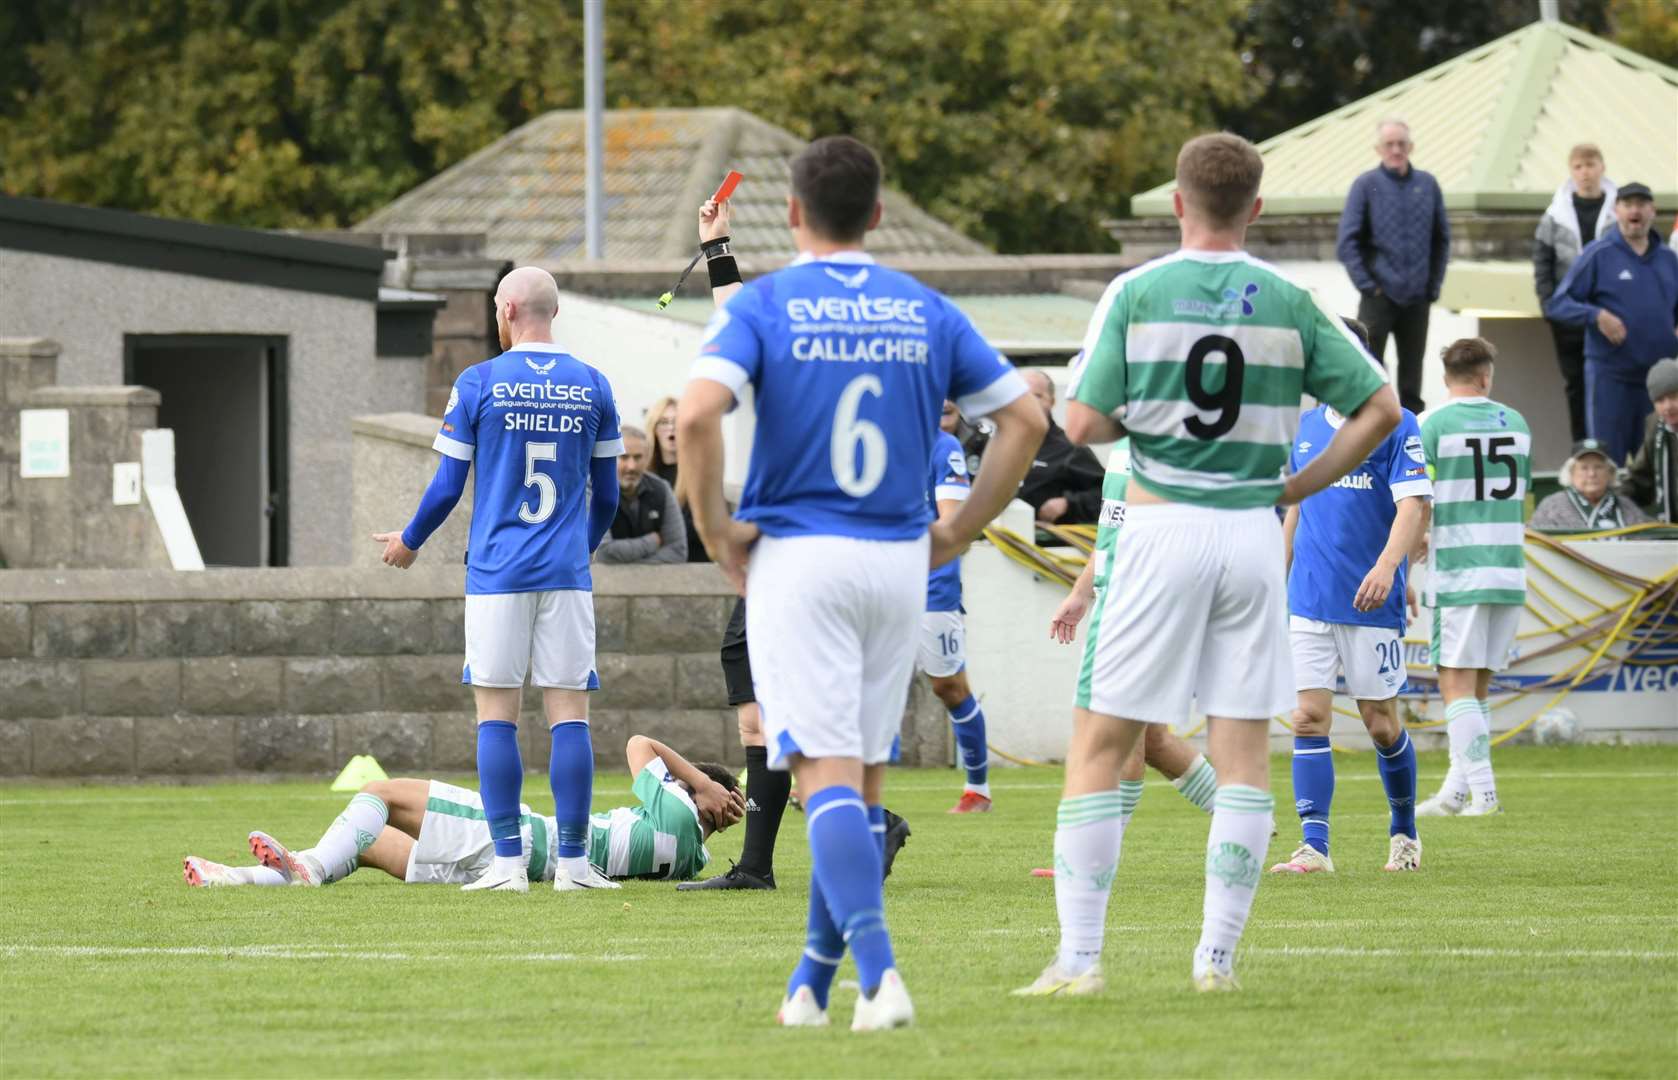 Linfield's Chris Chields receiving a red card after his second offence. ..Buckie Thistle v Linfield, Victoria Park...Picture: Beth Taylor.